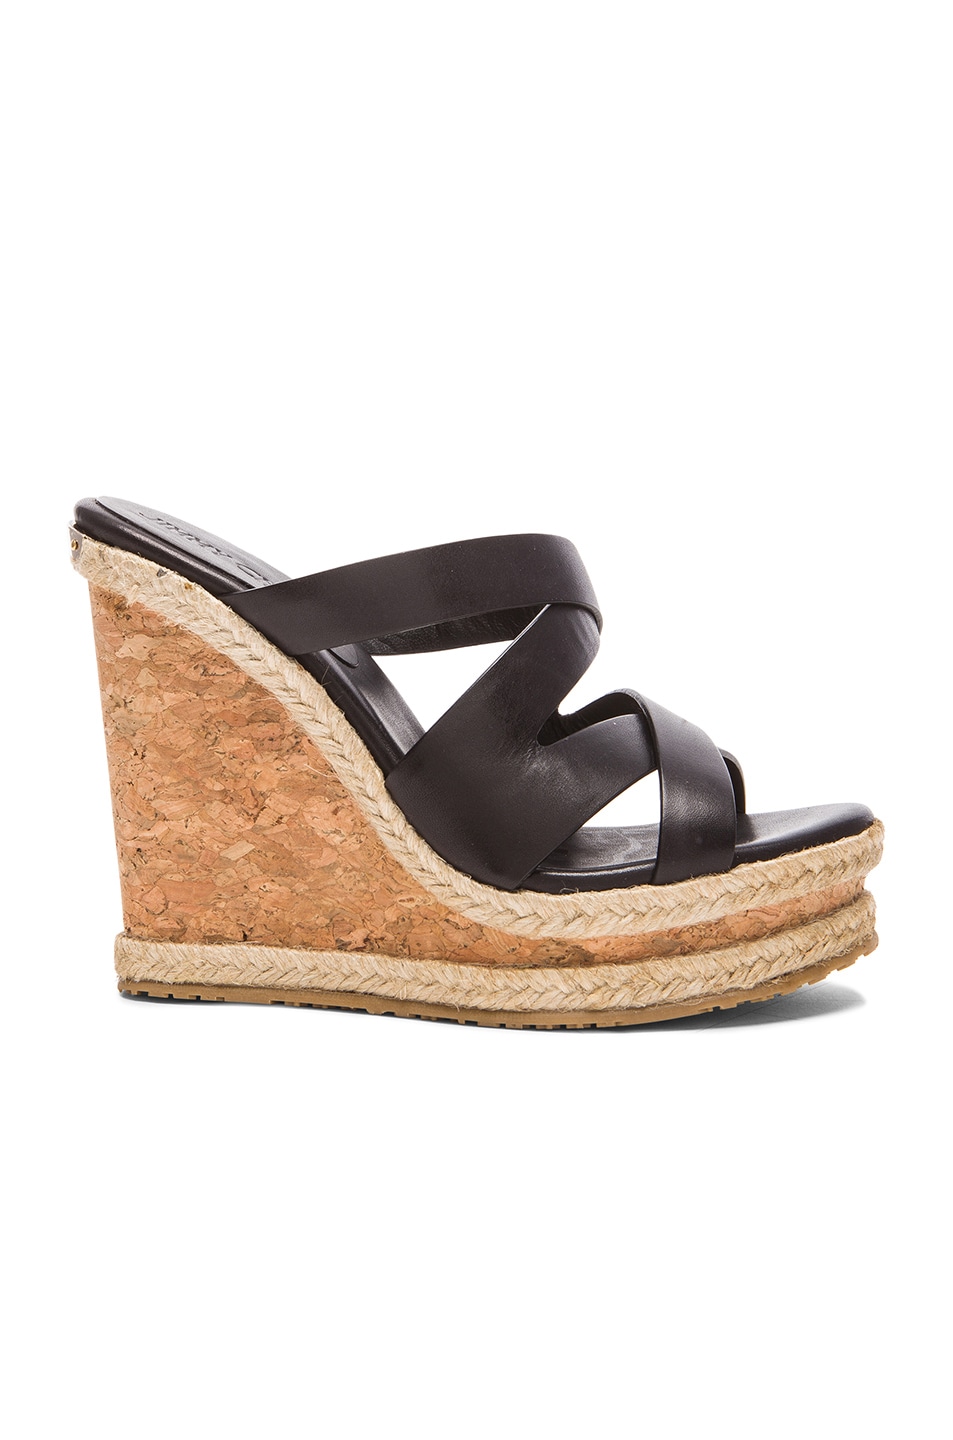 Image 1 of Jimmy Choo Prisma Leather Wedges in Black